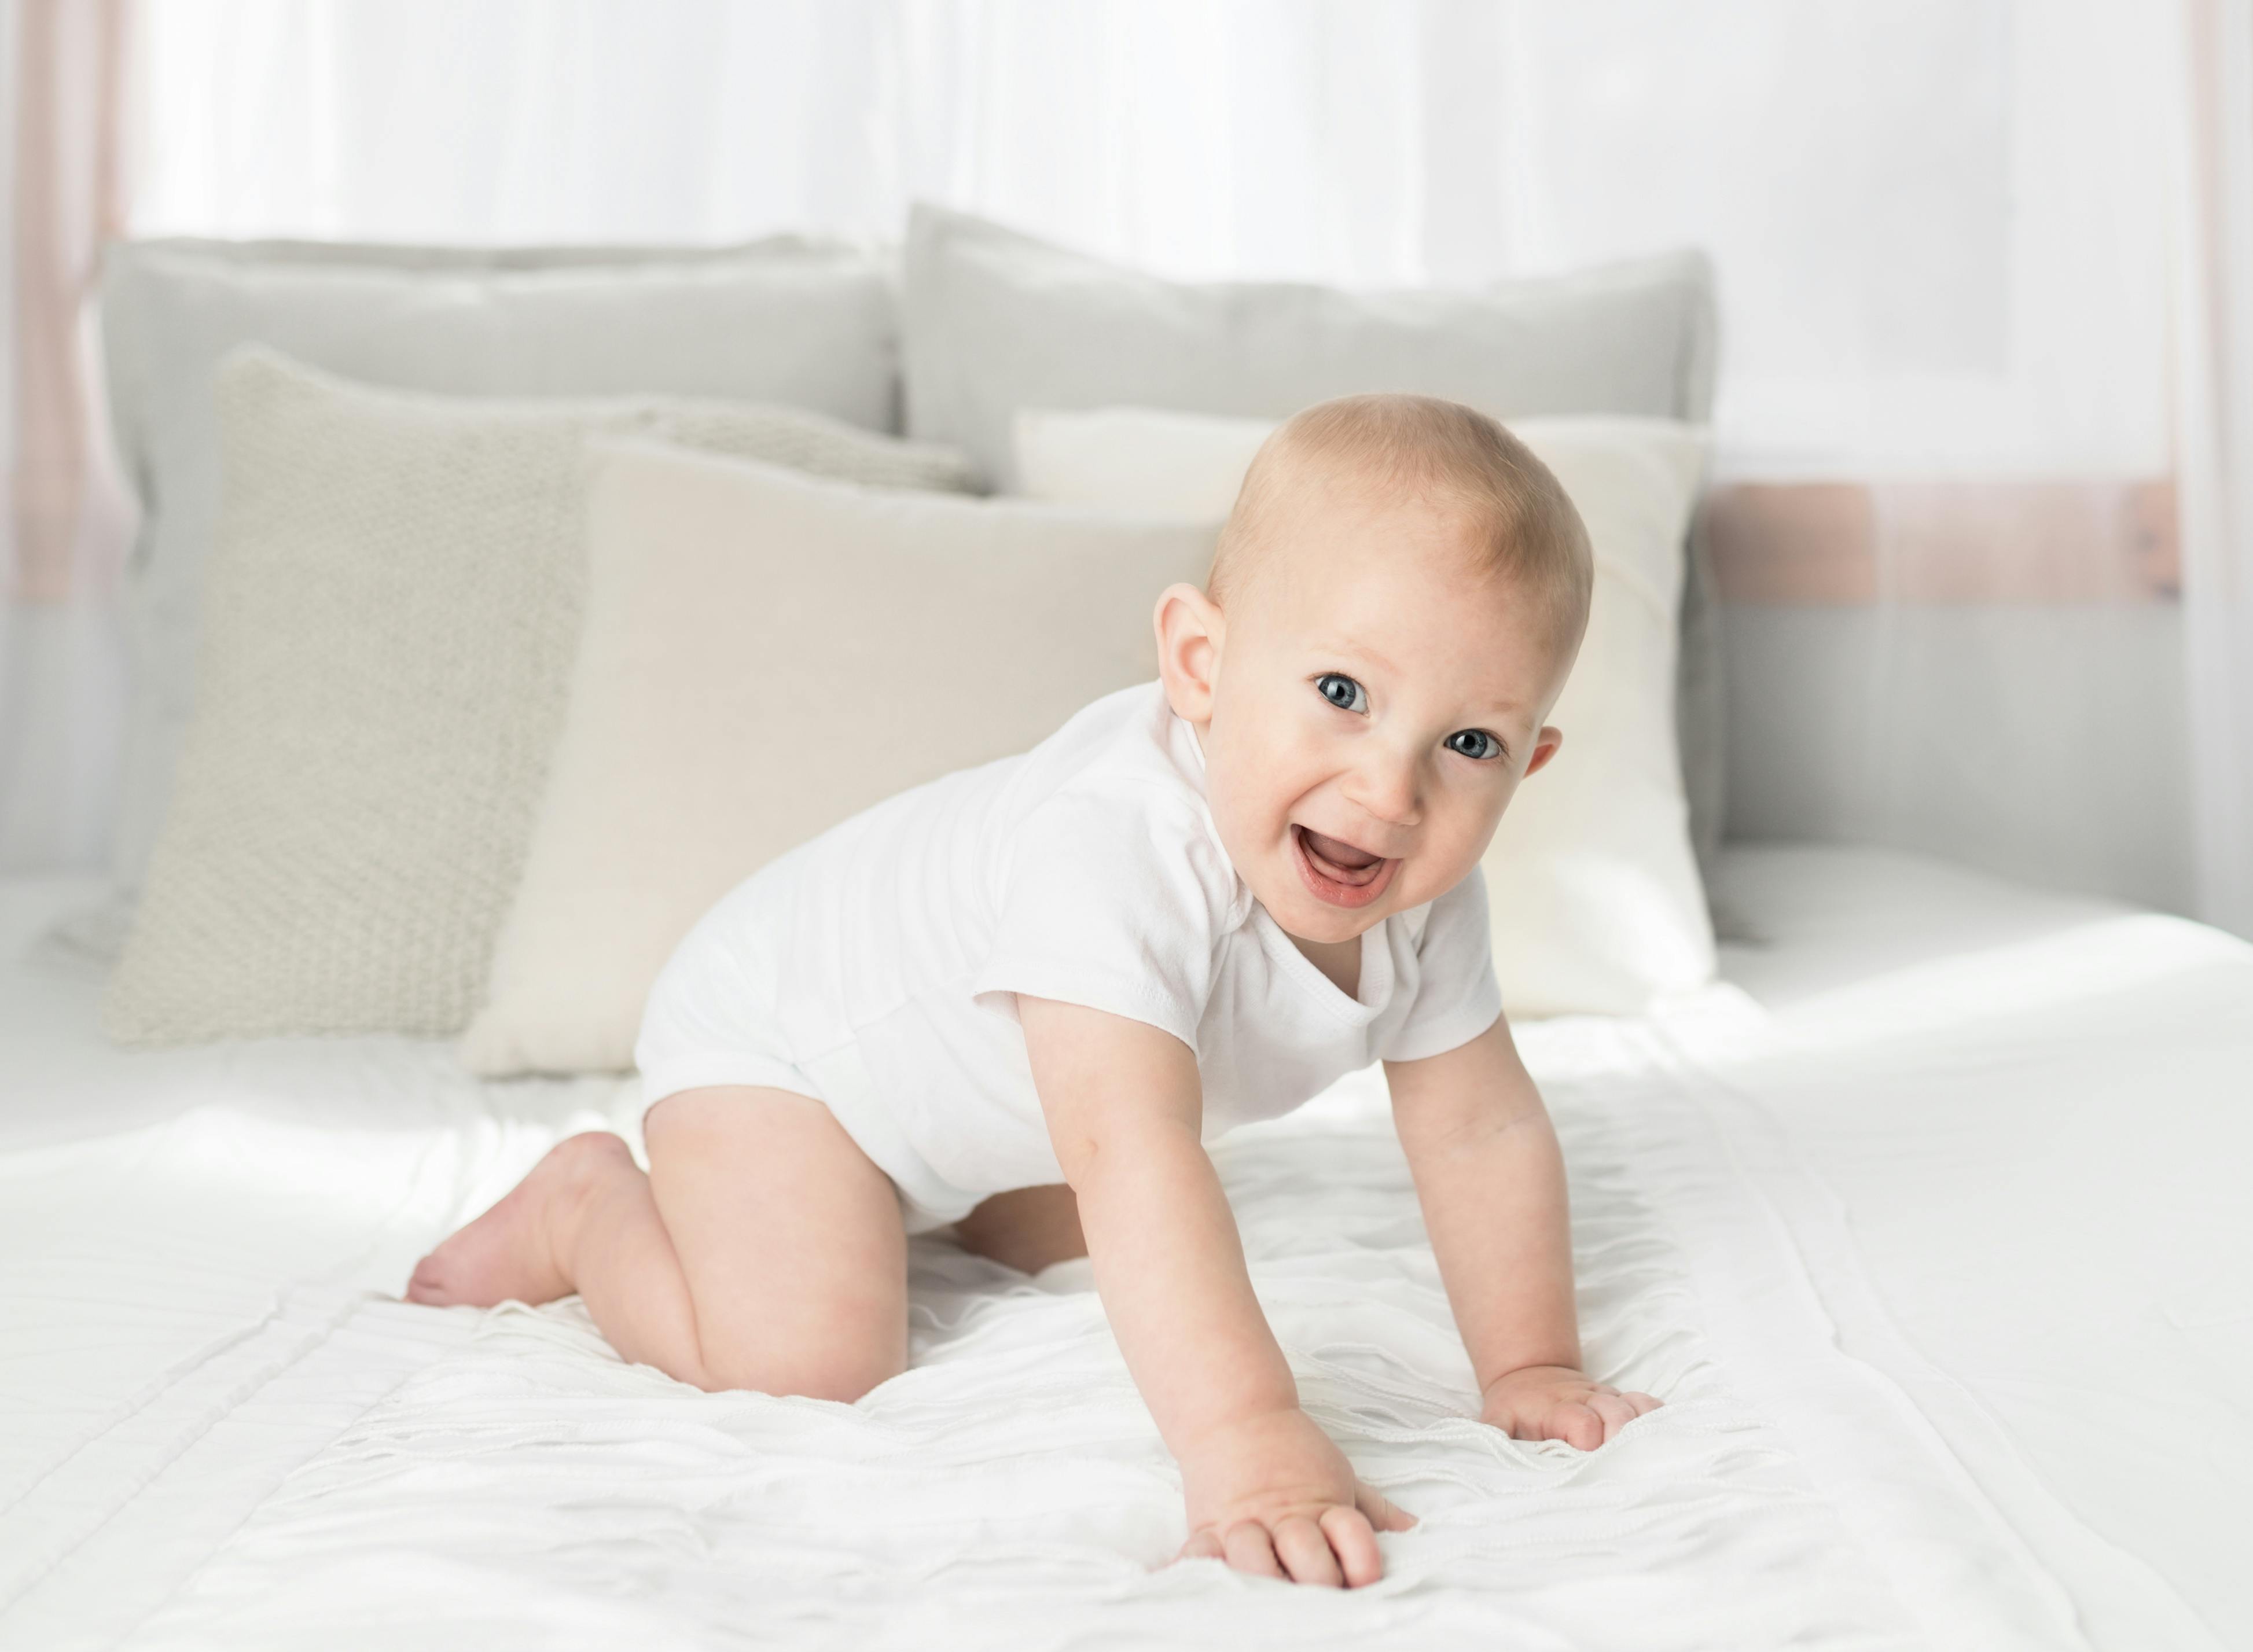 Baby Bed Photos Download The BEST Free Baby Bed Stock Photos  HD Images